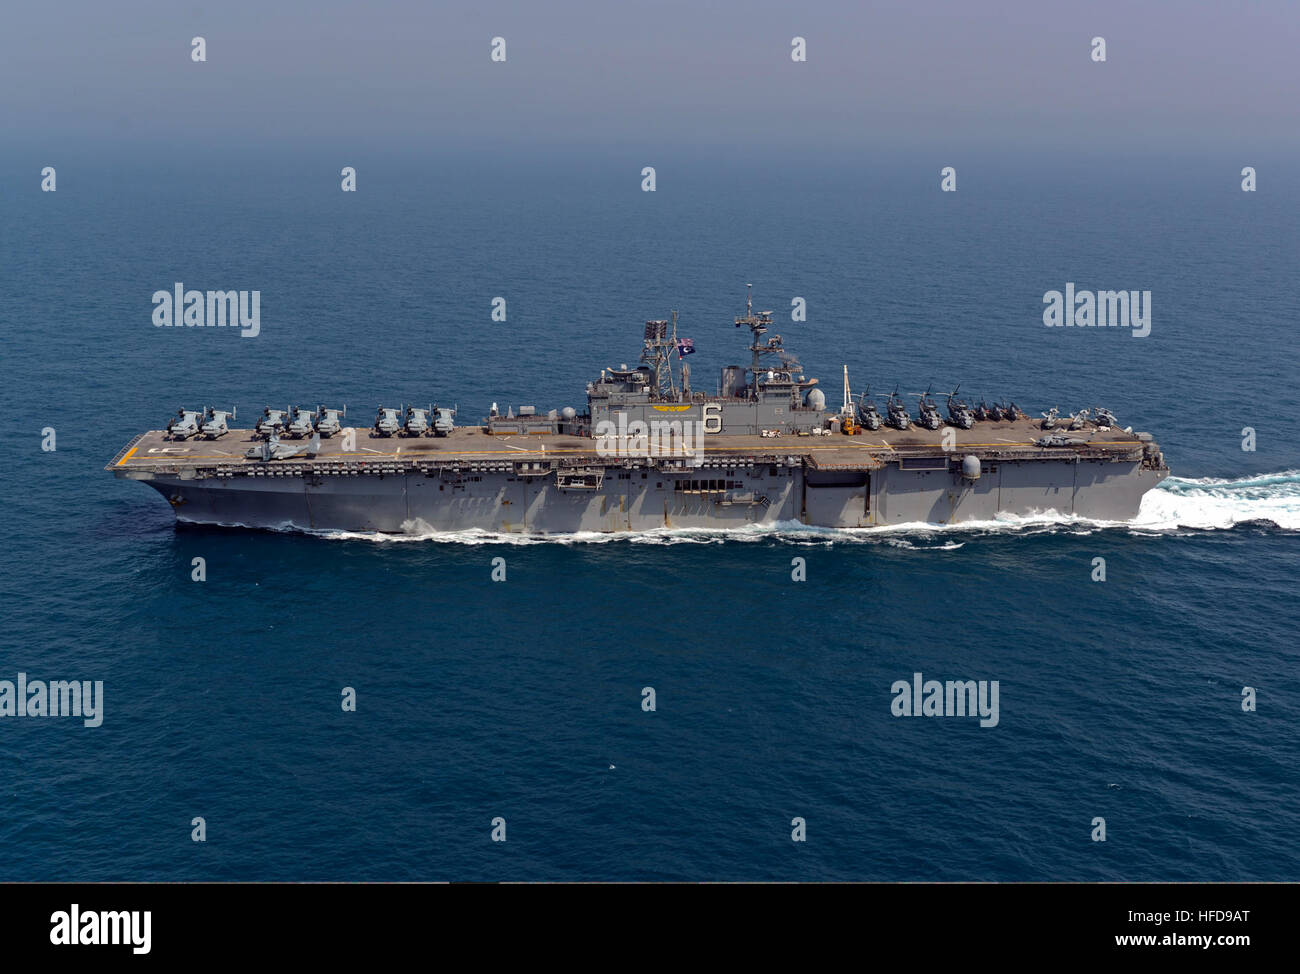 The amphibious assault ship USS Bonhomme Richard (LHD 6) transits the East China Sea during a photo exercise March 27, 2014. The Bonhomme Richard was the flagship of the Bonhomme Richard Amphibious Ready Group and was participating in exercise Ssang Yong 14, a combined U.S.-South Korean combat readiness and joint/combined interoperability exercise designed to advance South Korean command and control capabilities through amphibious operations. (U.S. Navy photo by Mass Communication Specialist 2nd Class Michael Achterling/Released) The amphibious assault ship USS Bonhomme Richard (LHD 6) transit Stock Photo